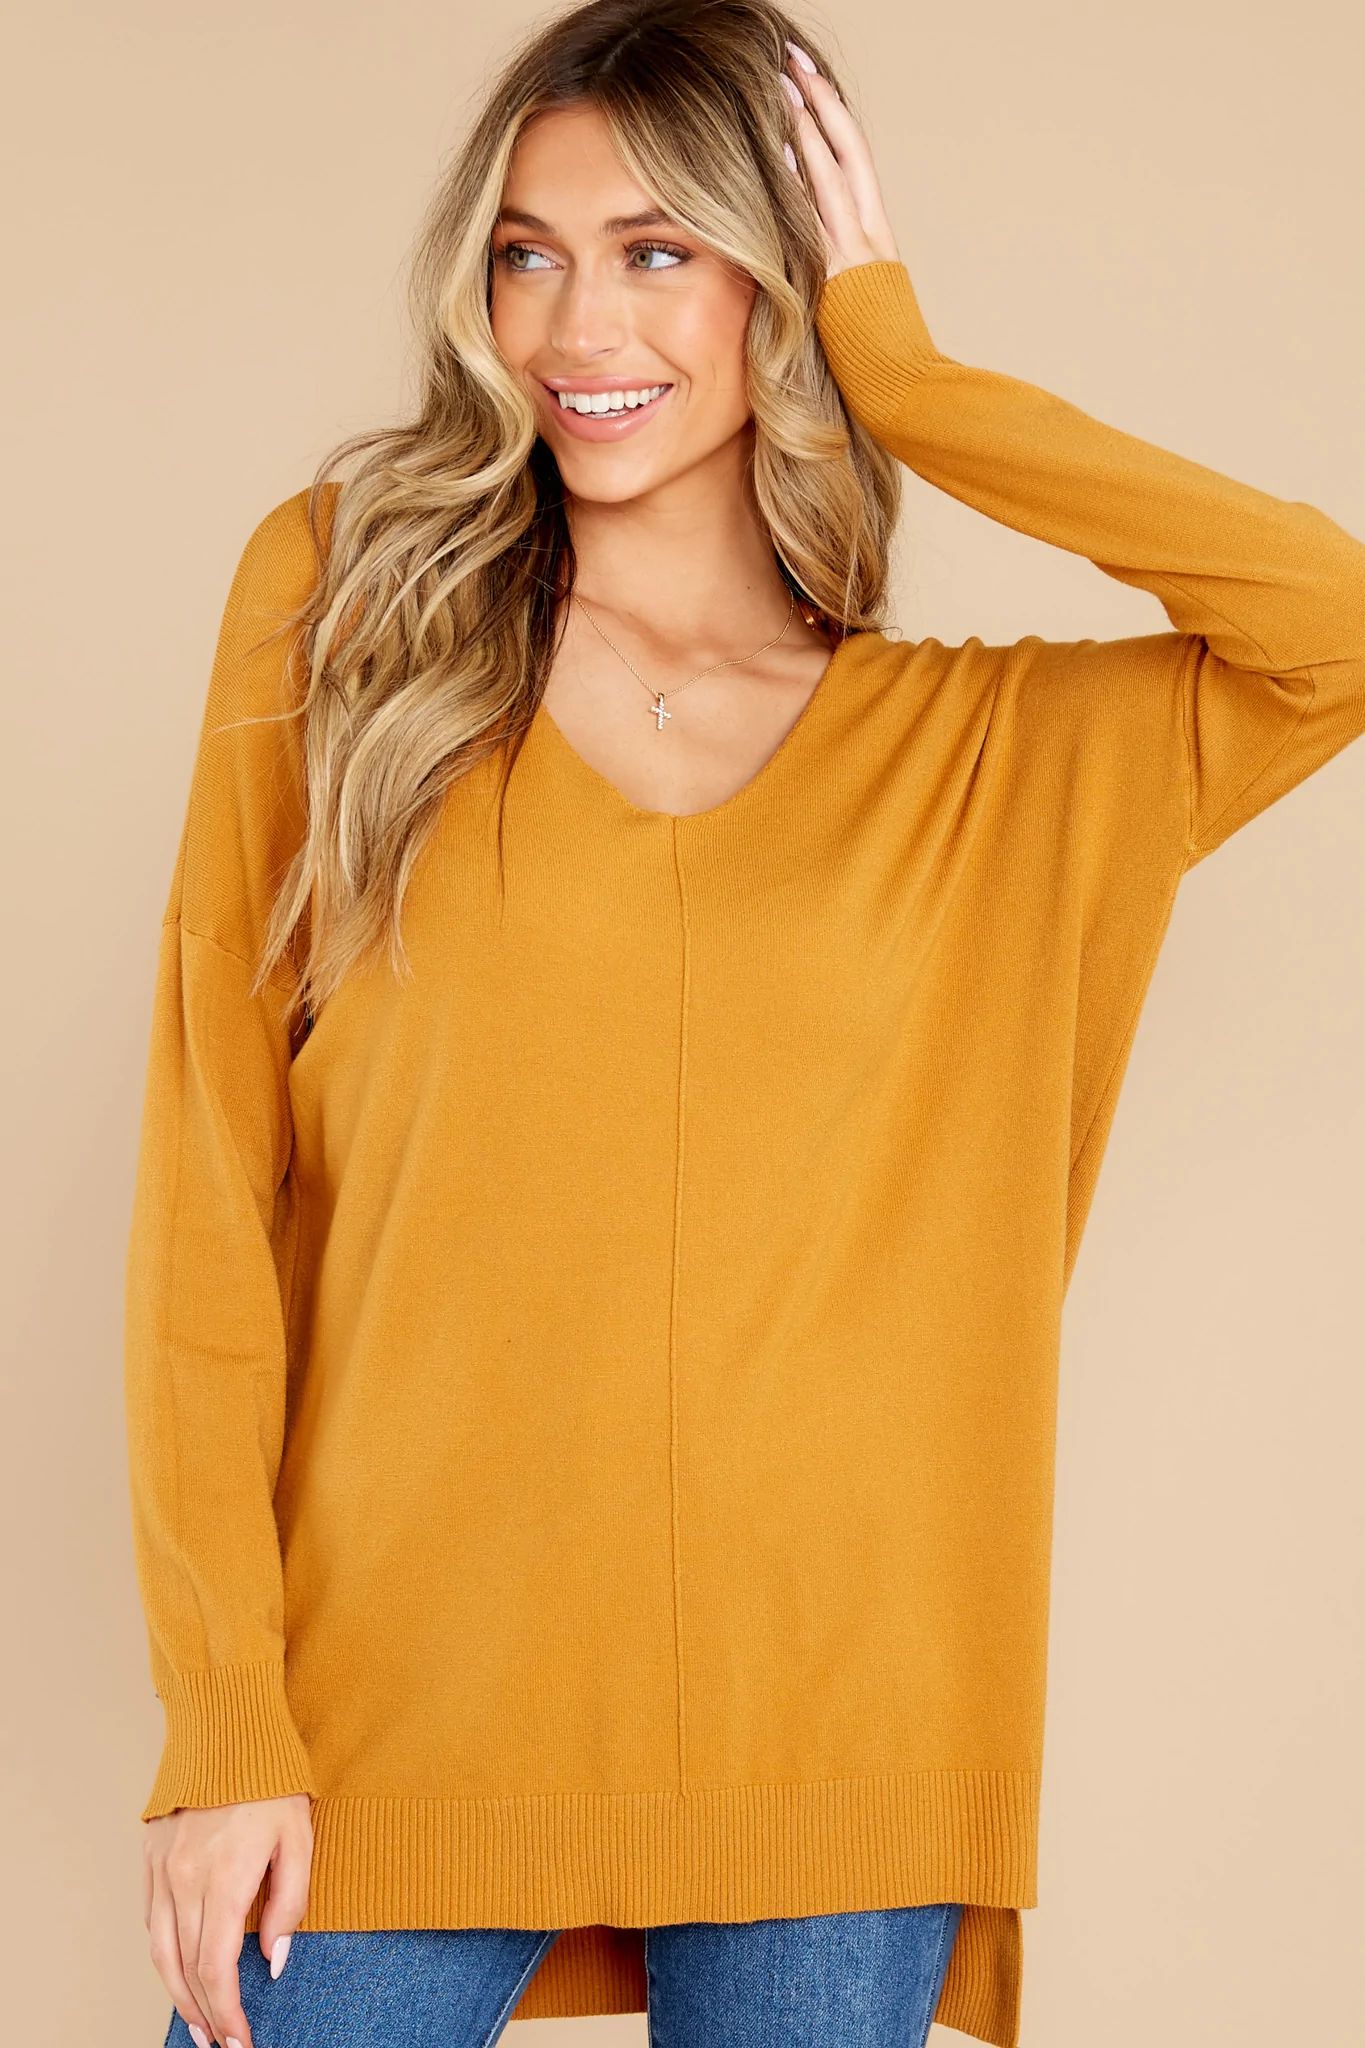 Wind Down Goldenrod Yellow Sweater | Red Dress 